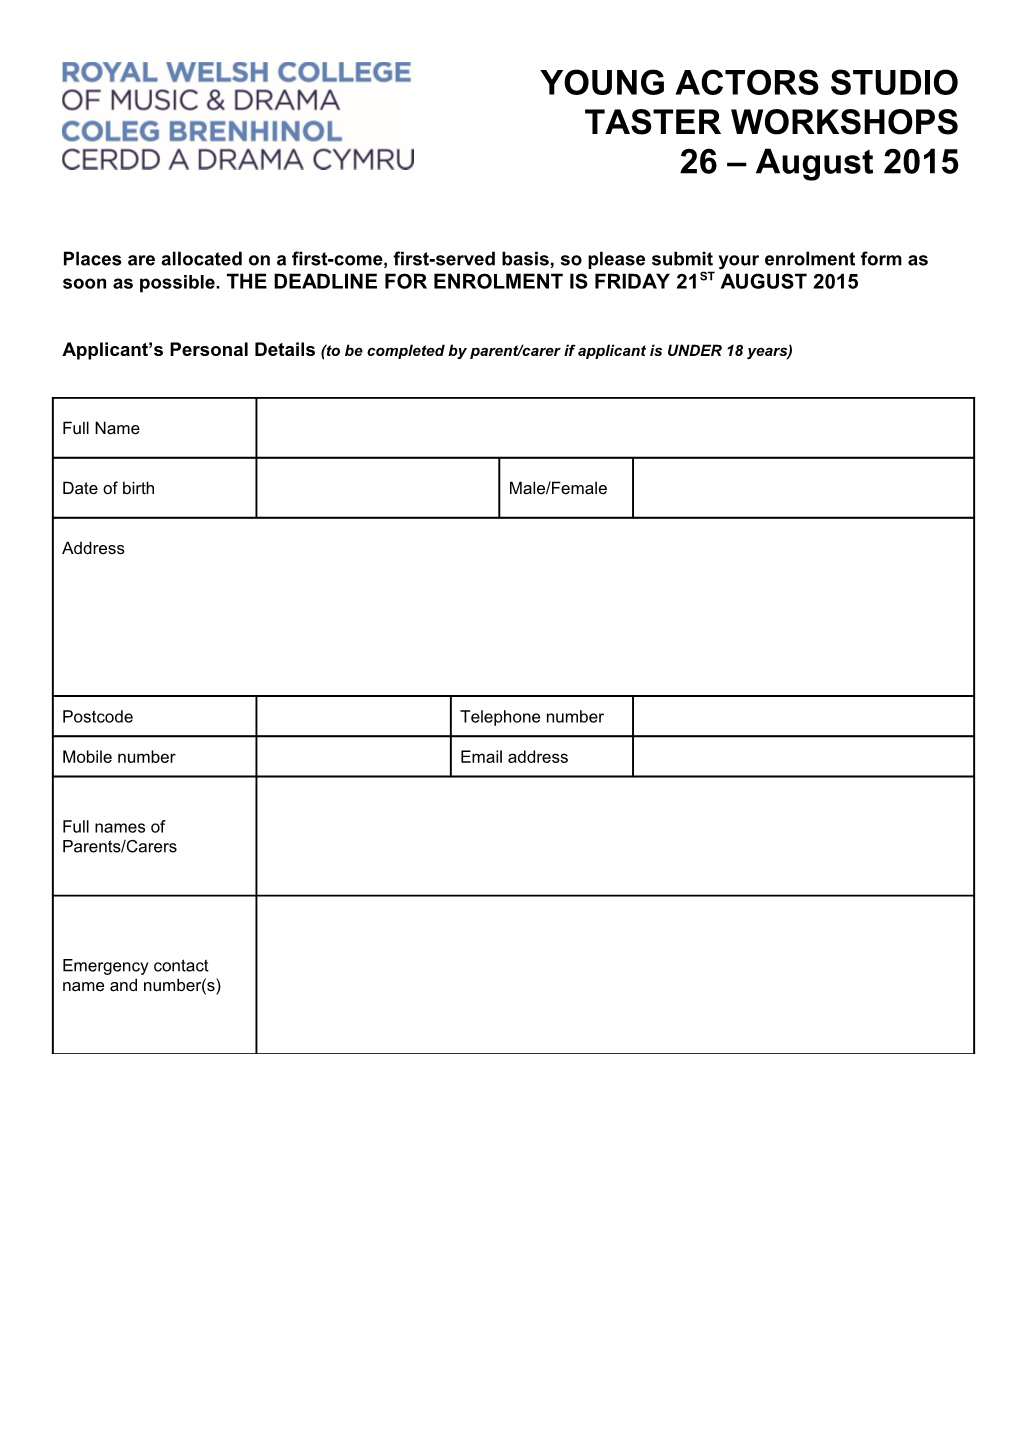 Applicant S Personal Details (To Be Completed by Parent/Carer If Applicant Is UNDER 18Years)